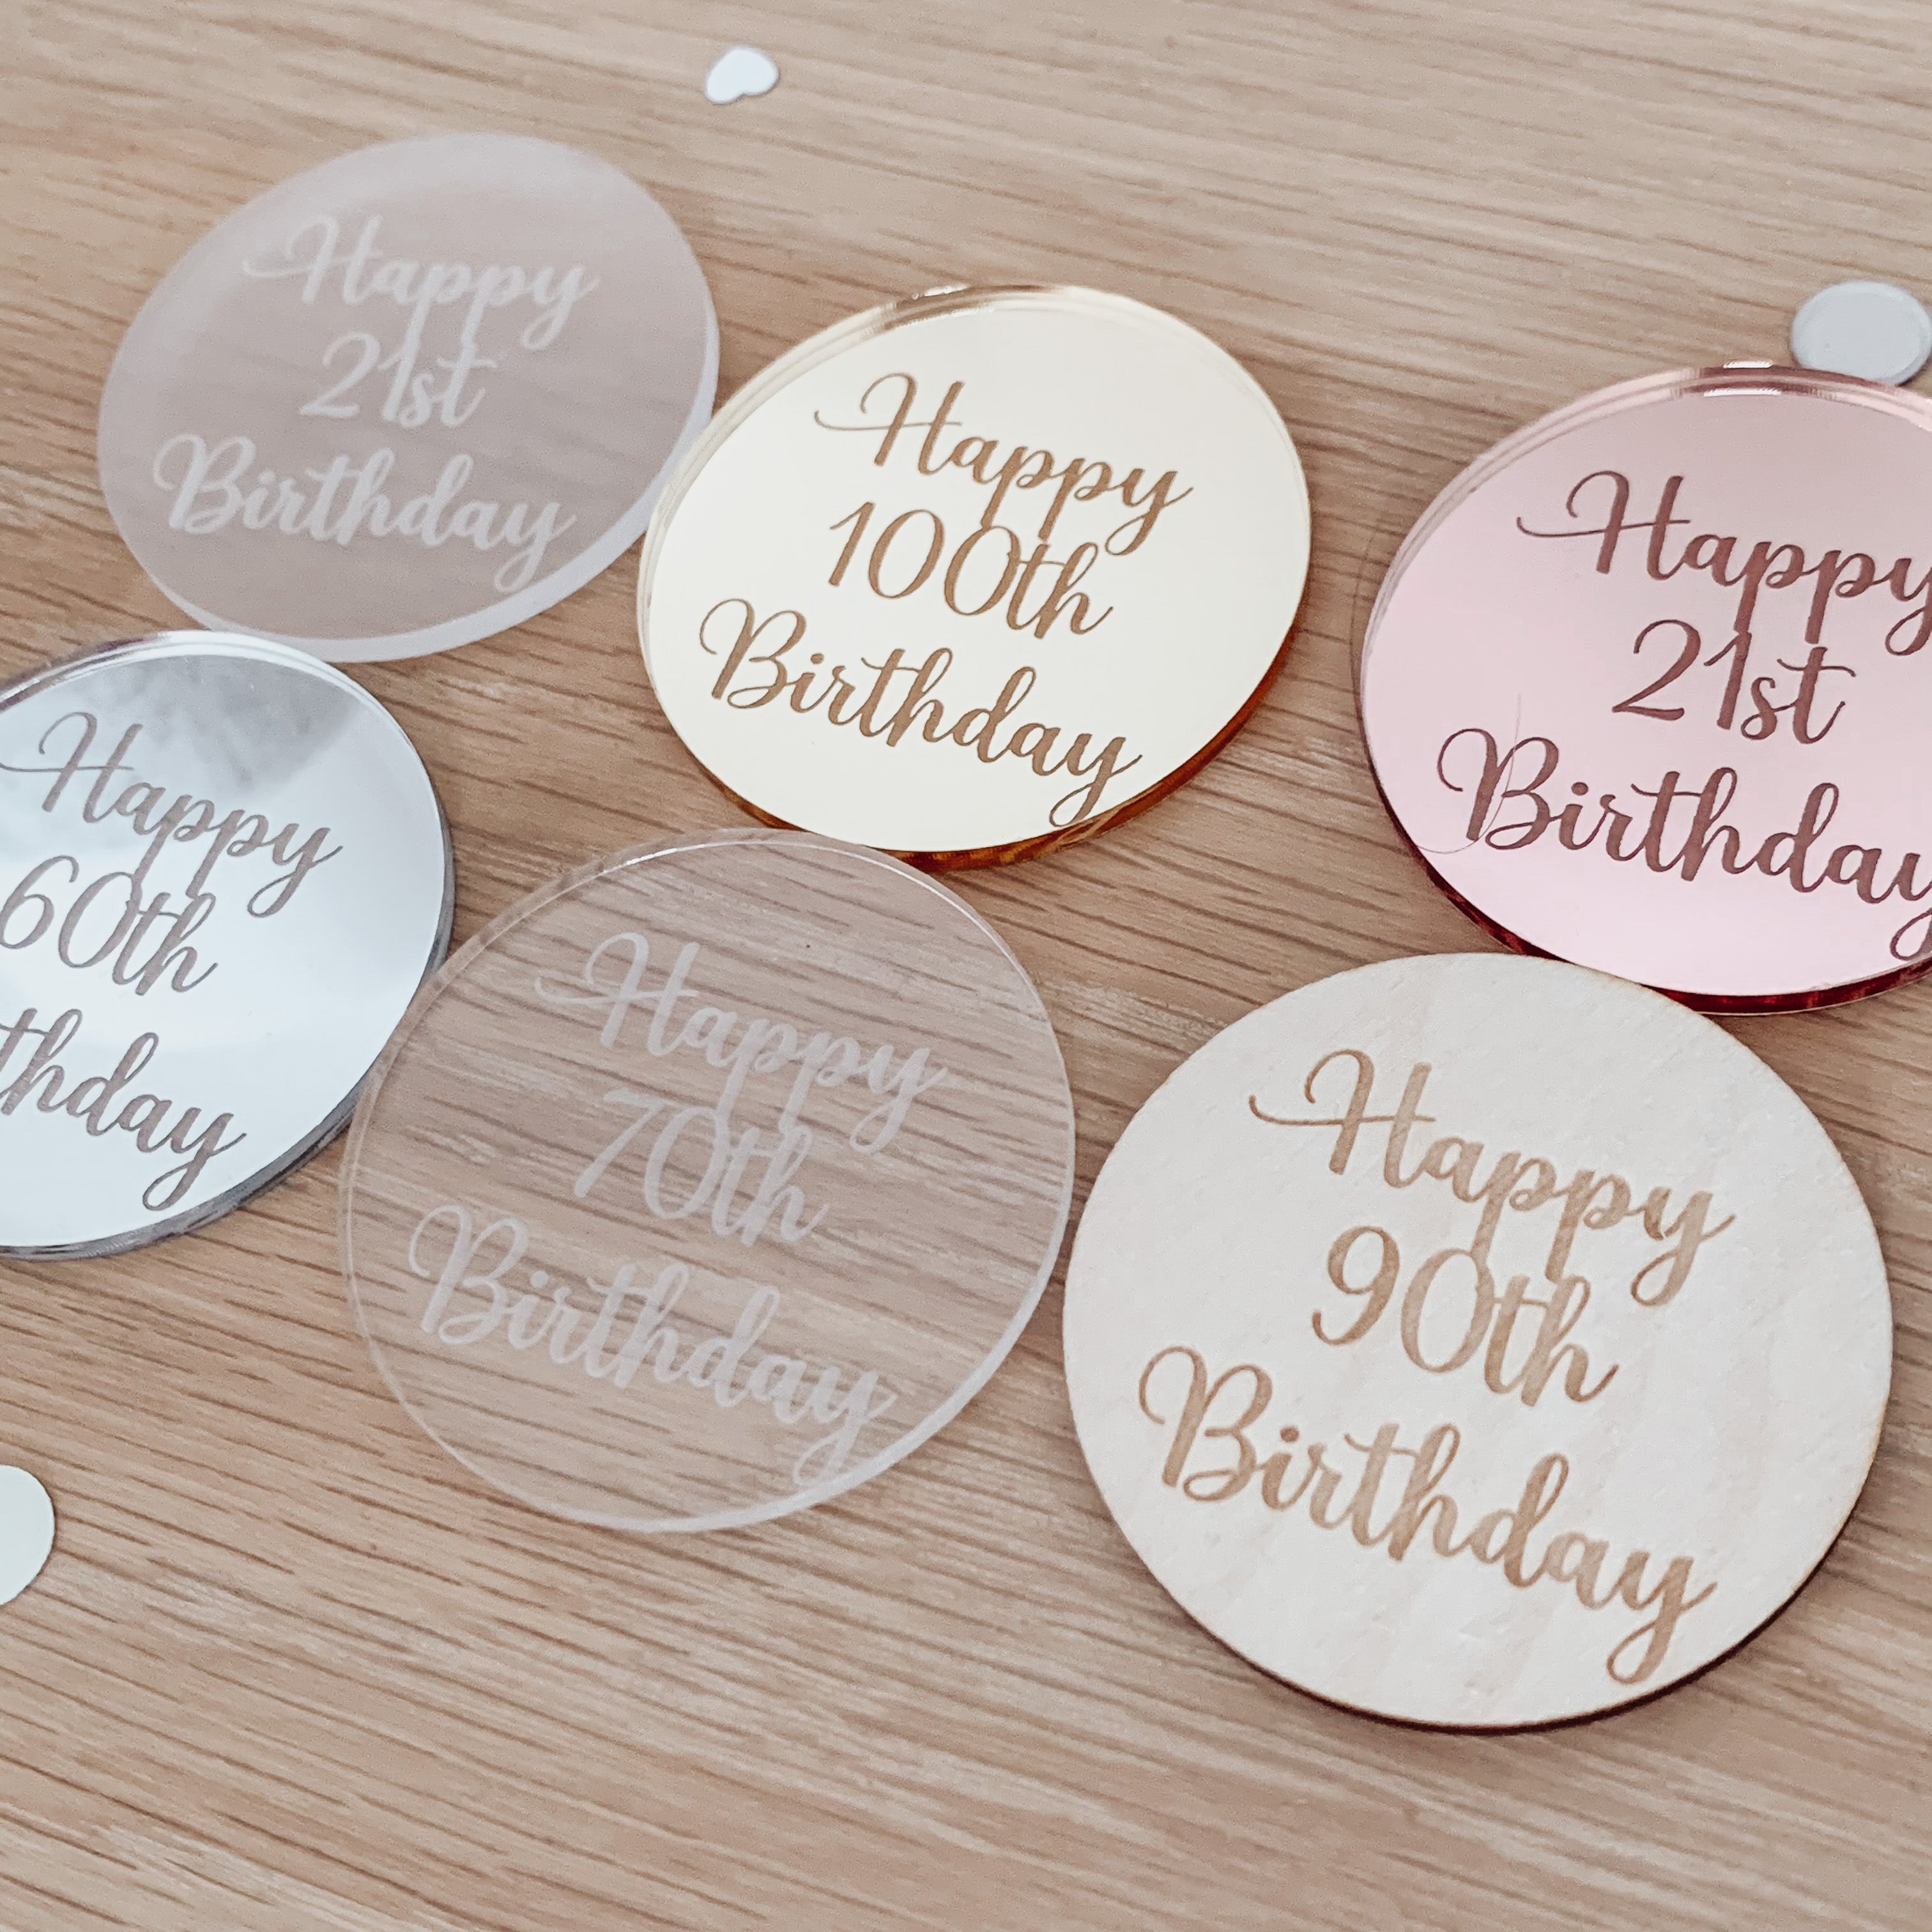 Mirror Acrylic Engraved Cake Charms